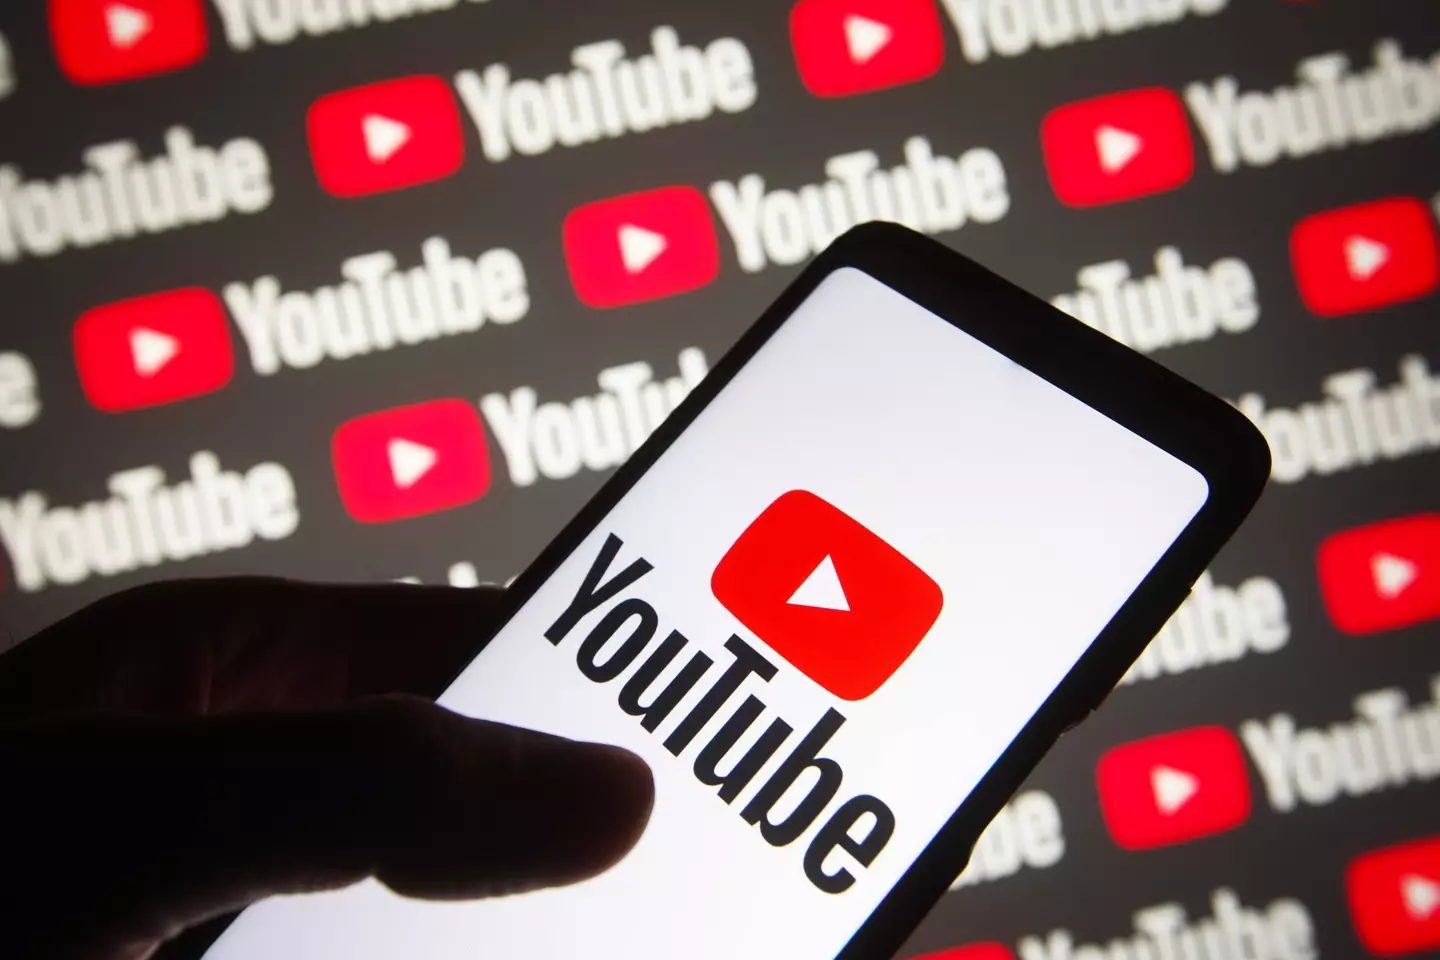 YouTube said users could face suspension if they use AI to generate content.